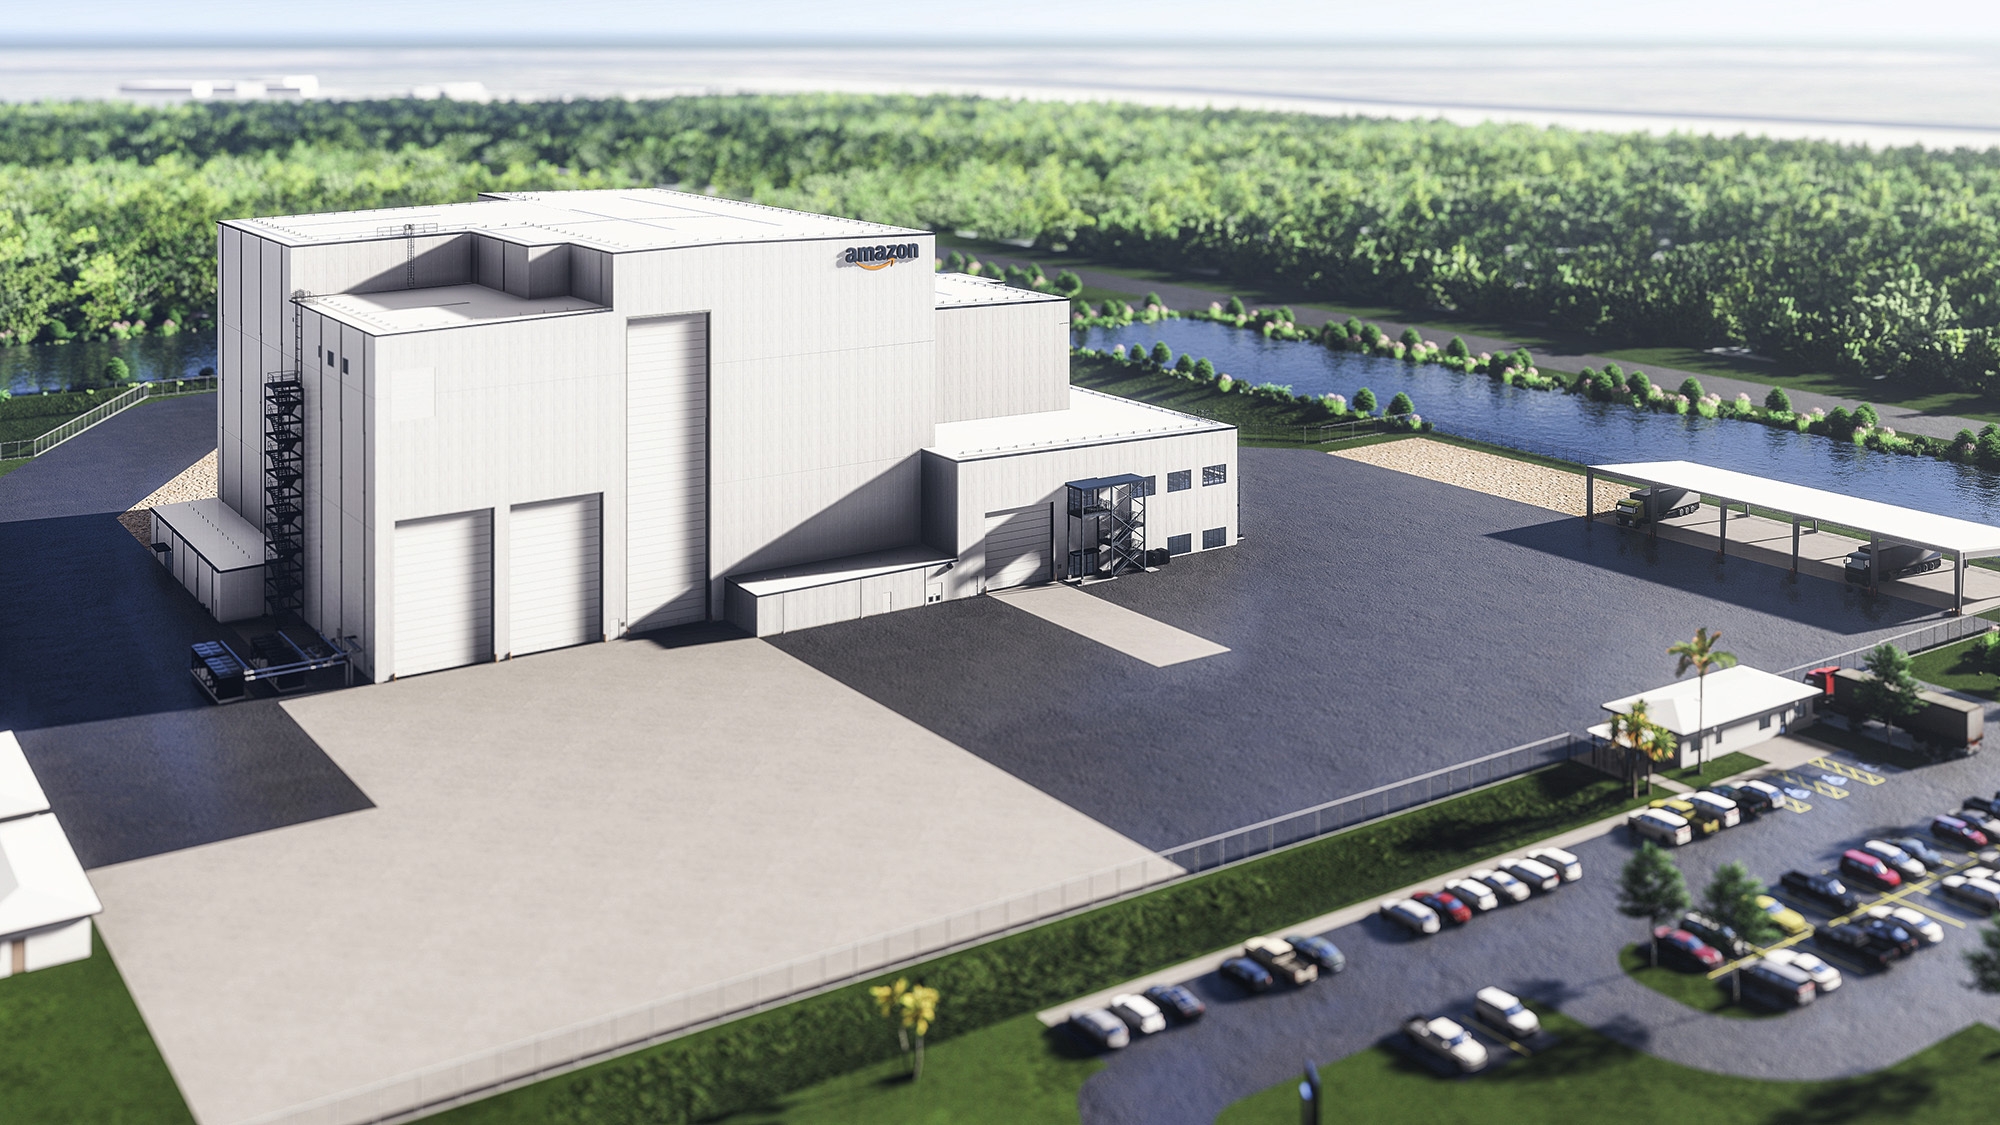 A mock-up of Project Kuiper's satellite-processing facility at Kennedy Space Center, which includes a building with the Amazon logo and a parking lot with trees around the facility. 